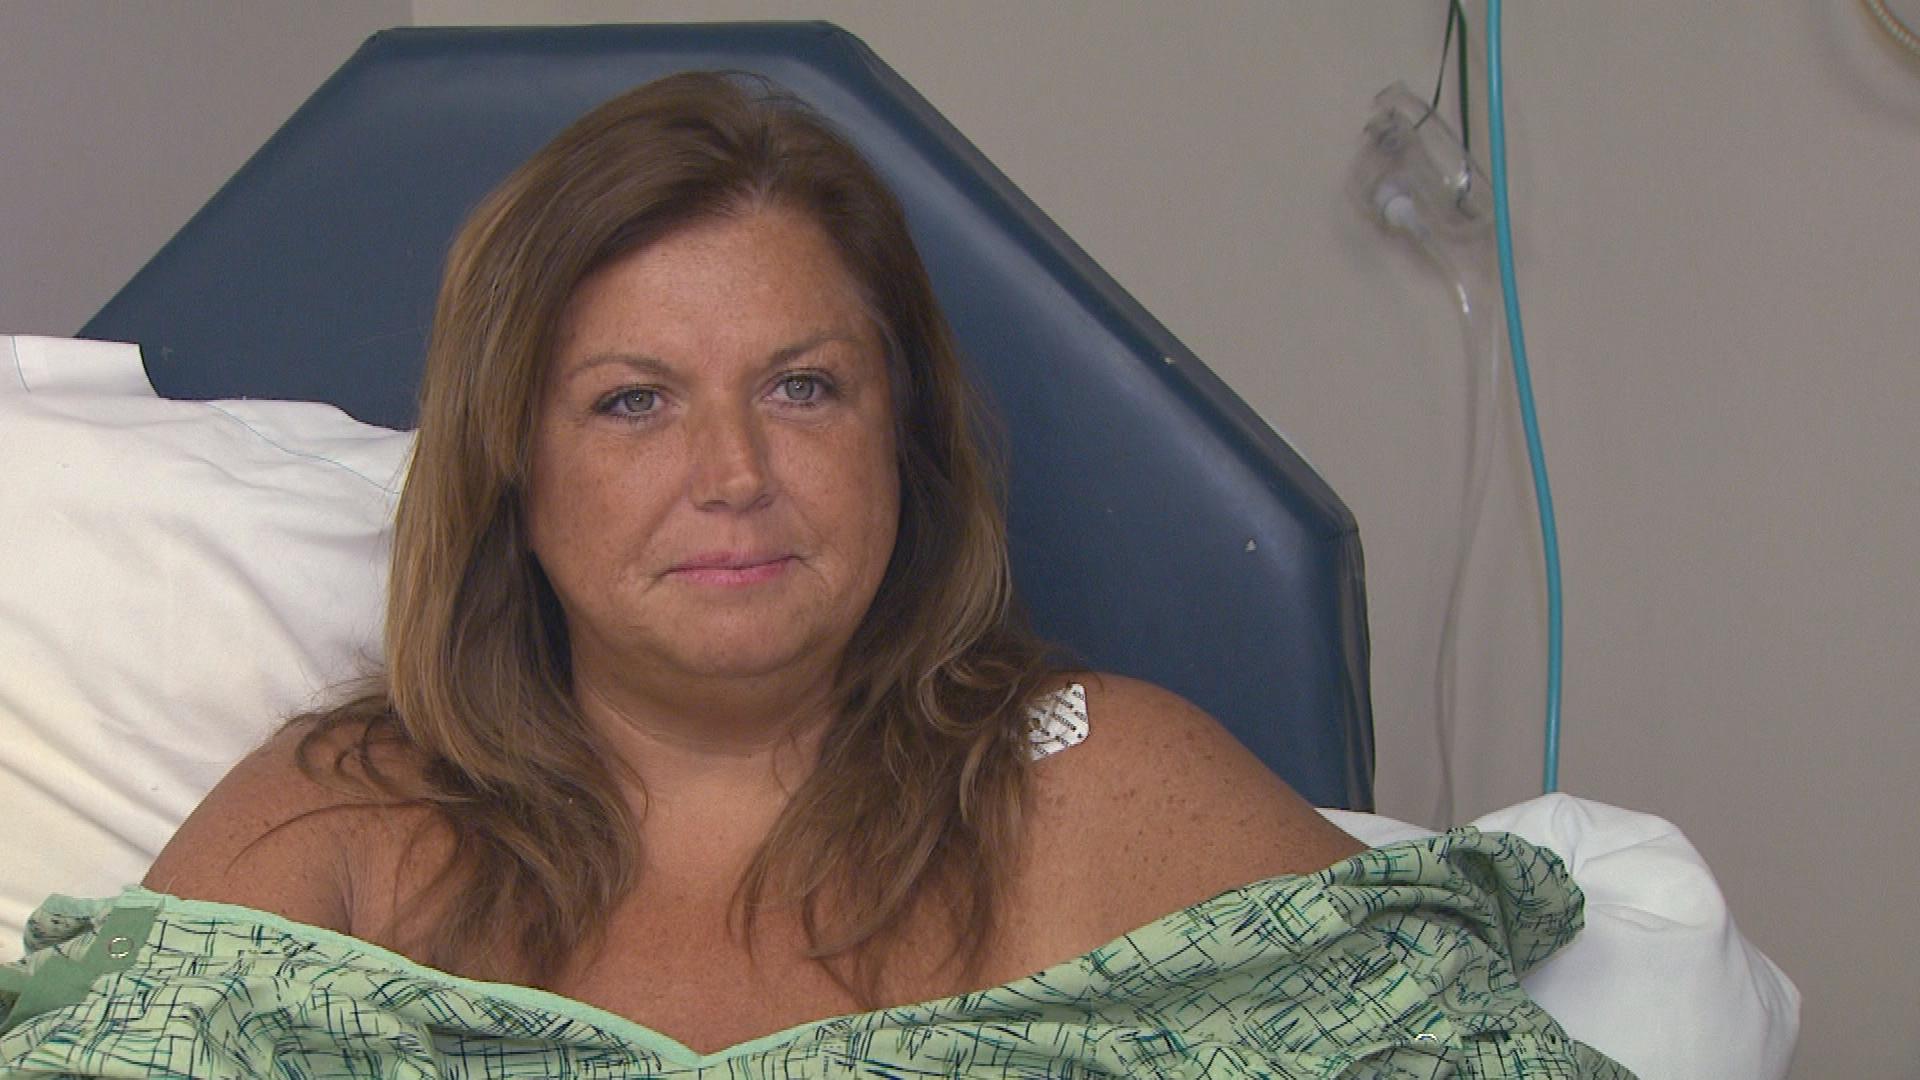 Abby Lee Miller Shows Off Scars, Removes Wig During Cancer: Pics